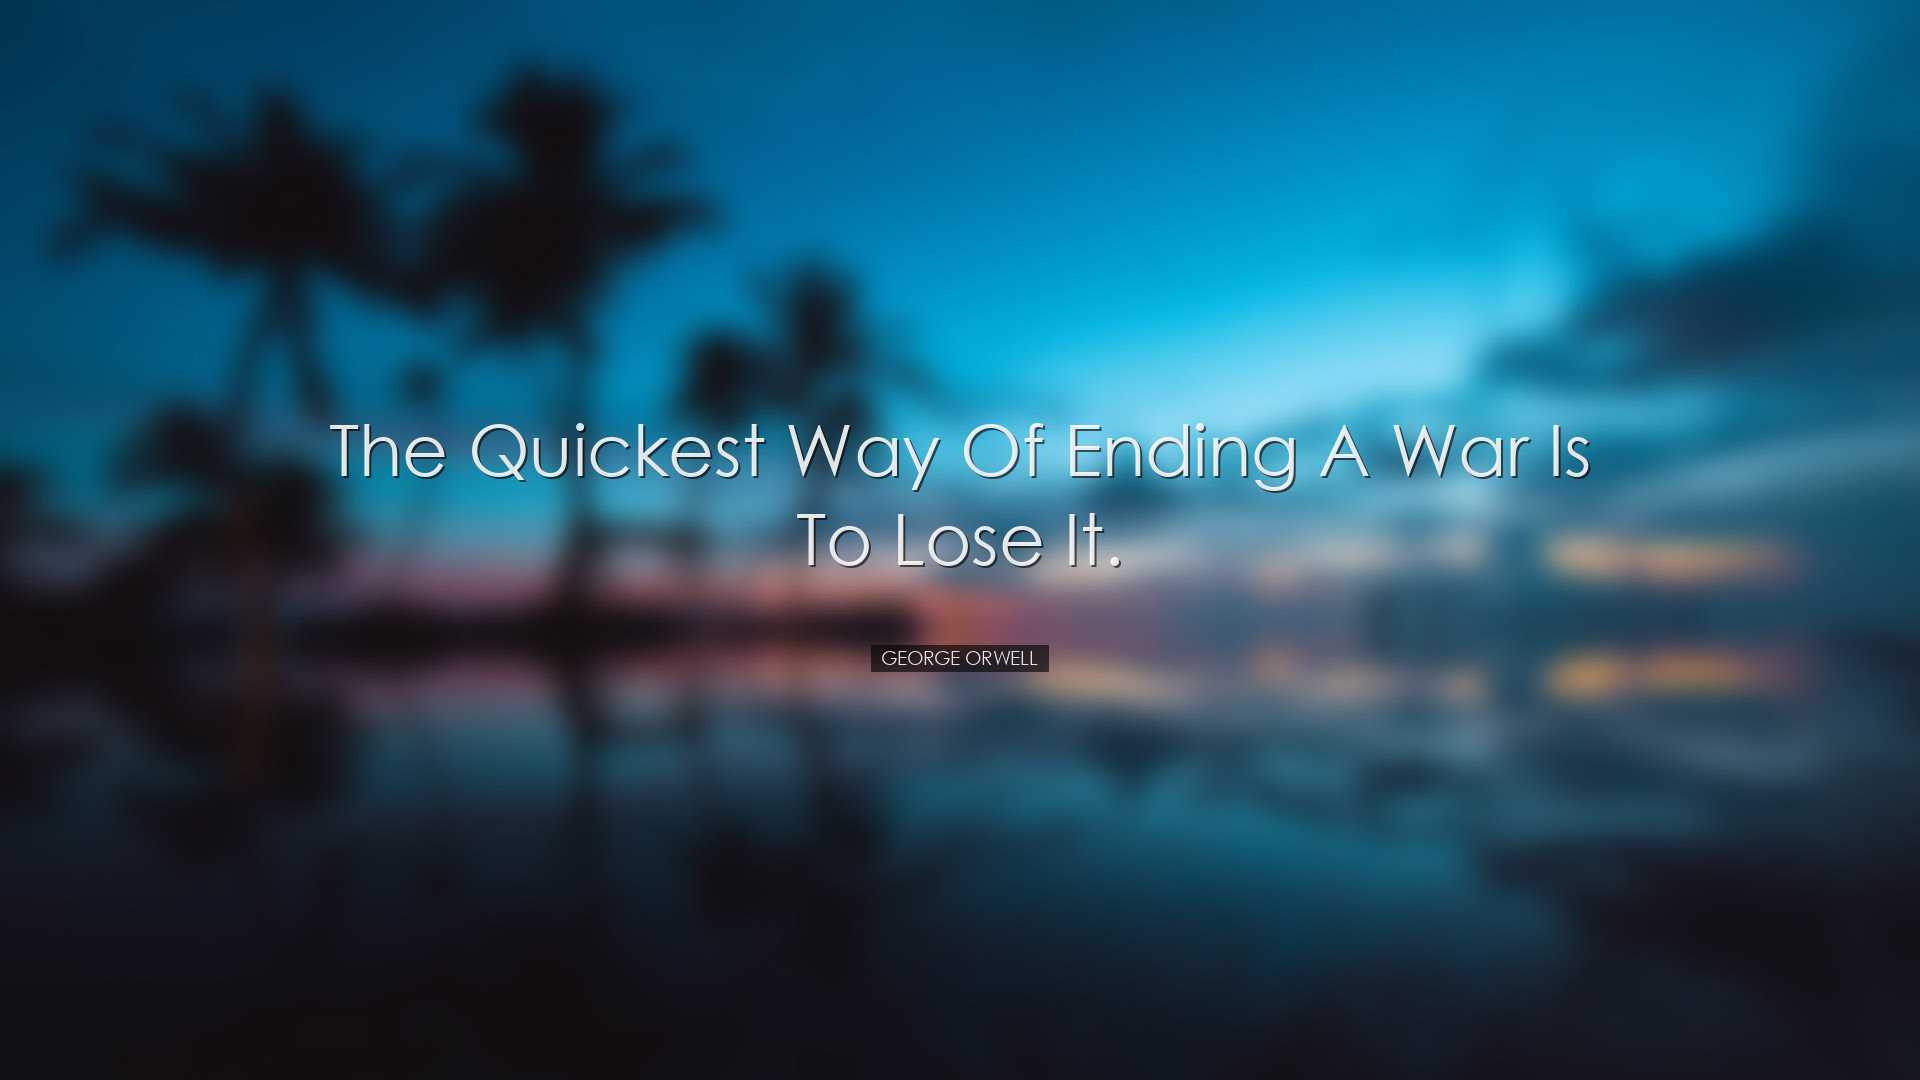 The quickest way of ending a war is to lose it. - George Orwell